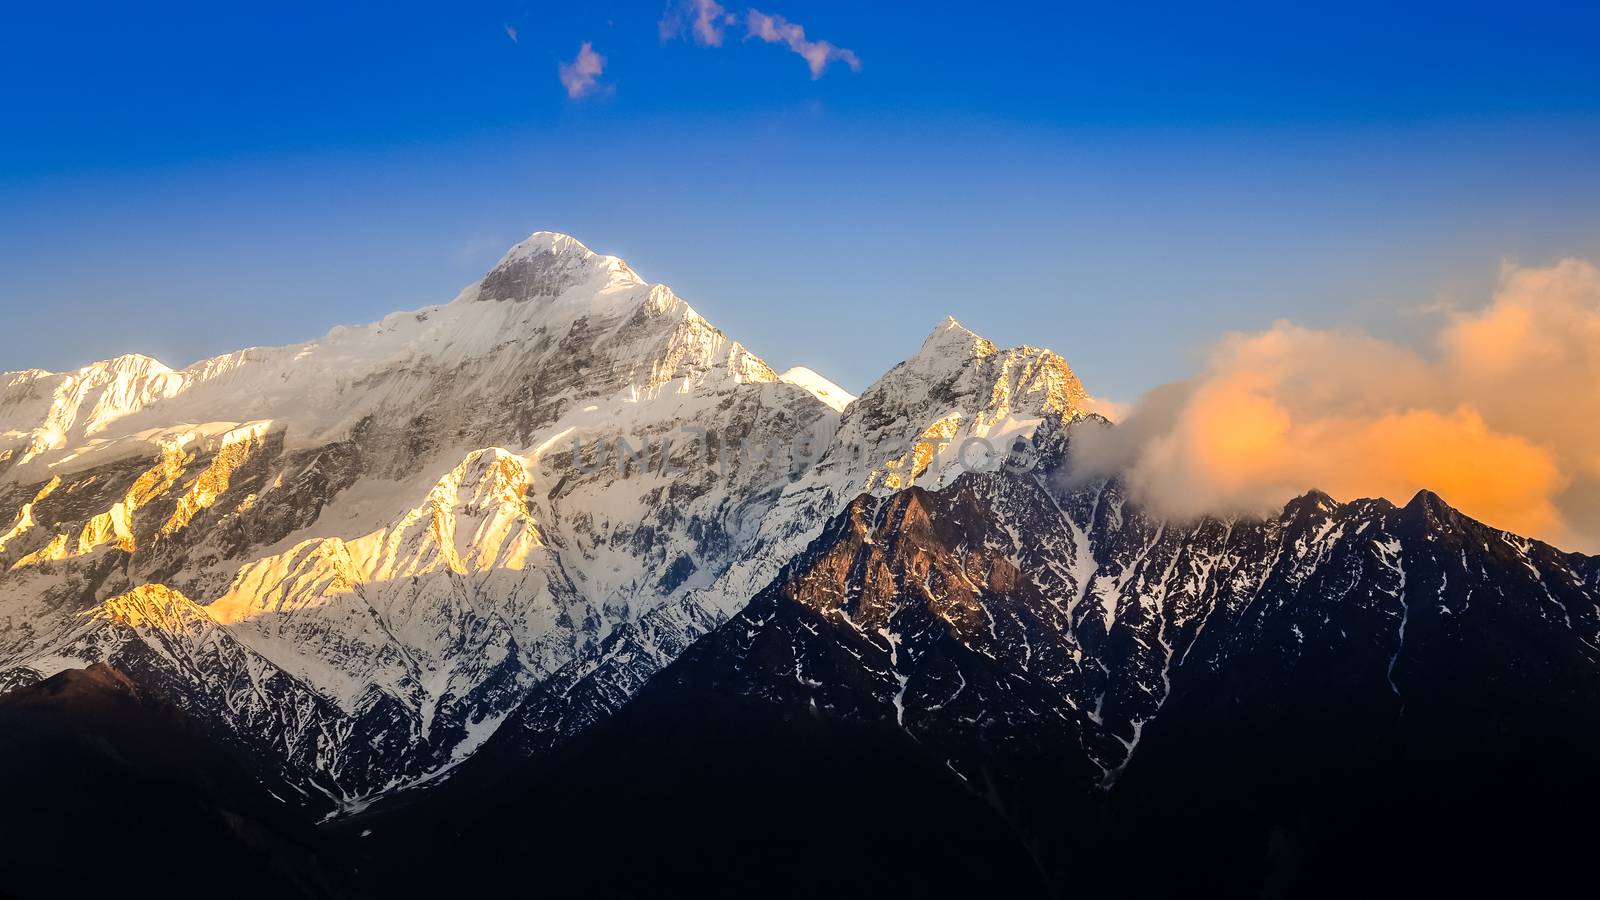 Scenic view of Himalayas mountains at sunset by martinm303